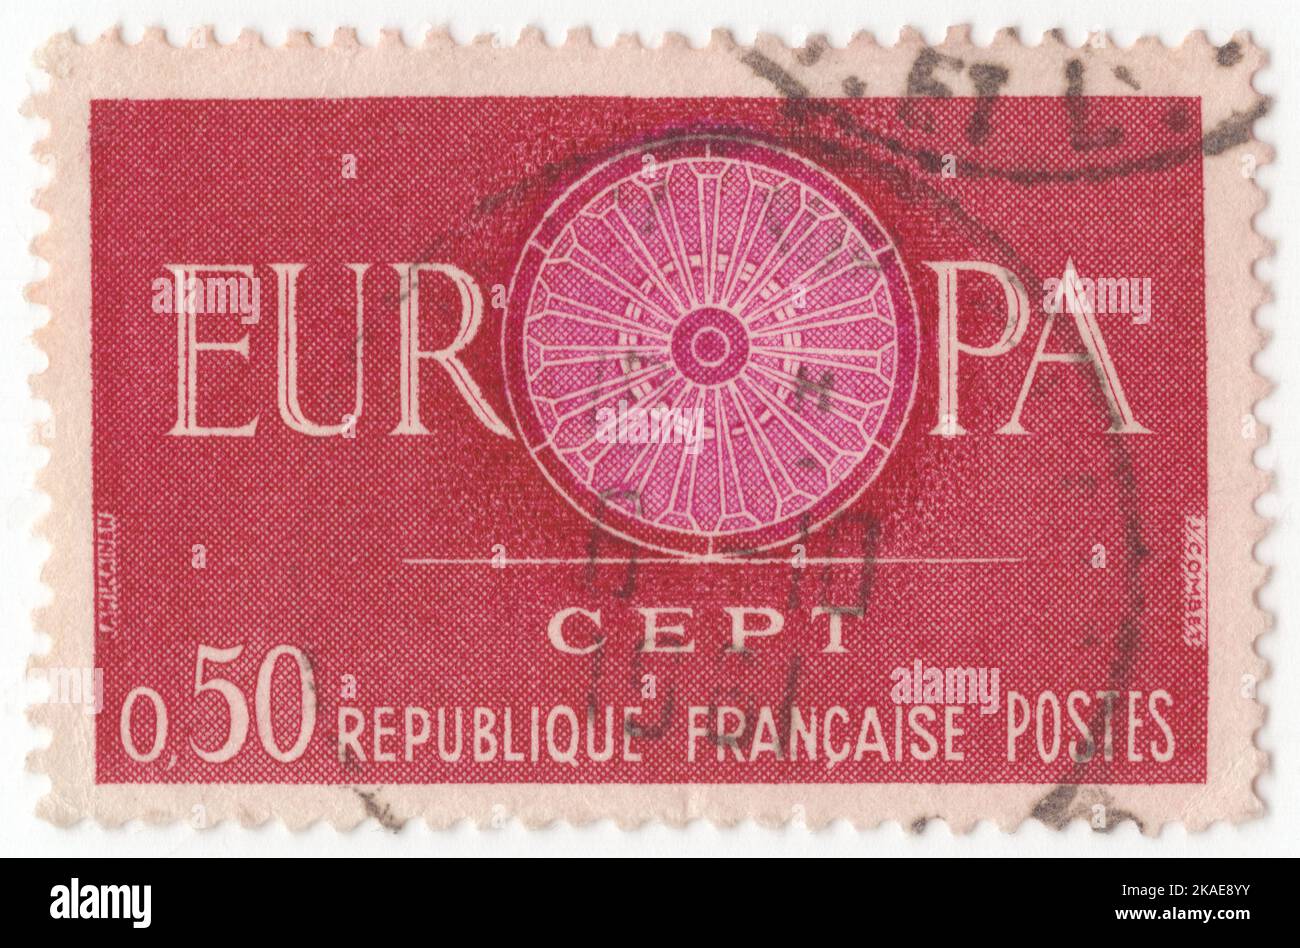 stock and hi-res francs 50 - Alamy photography images